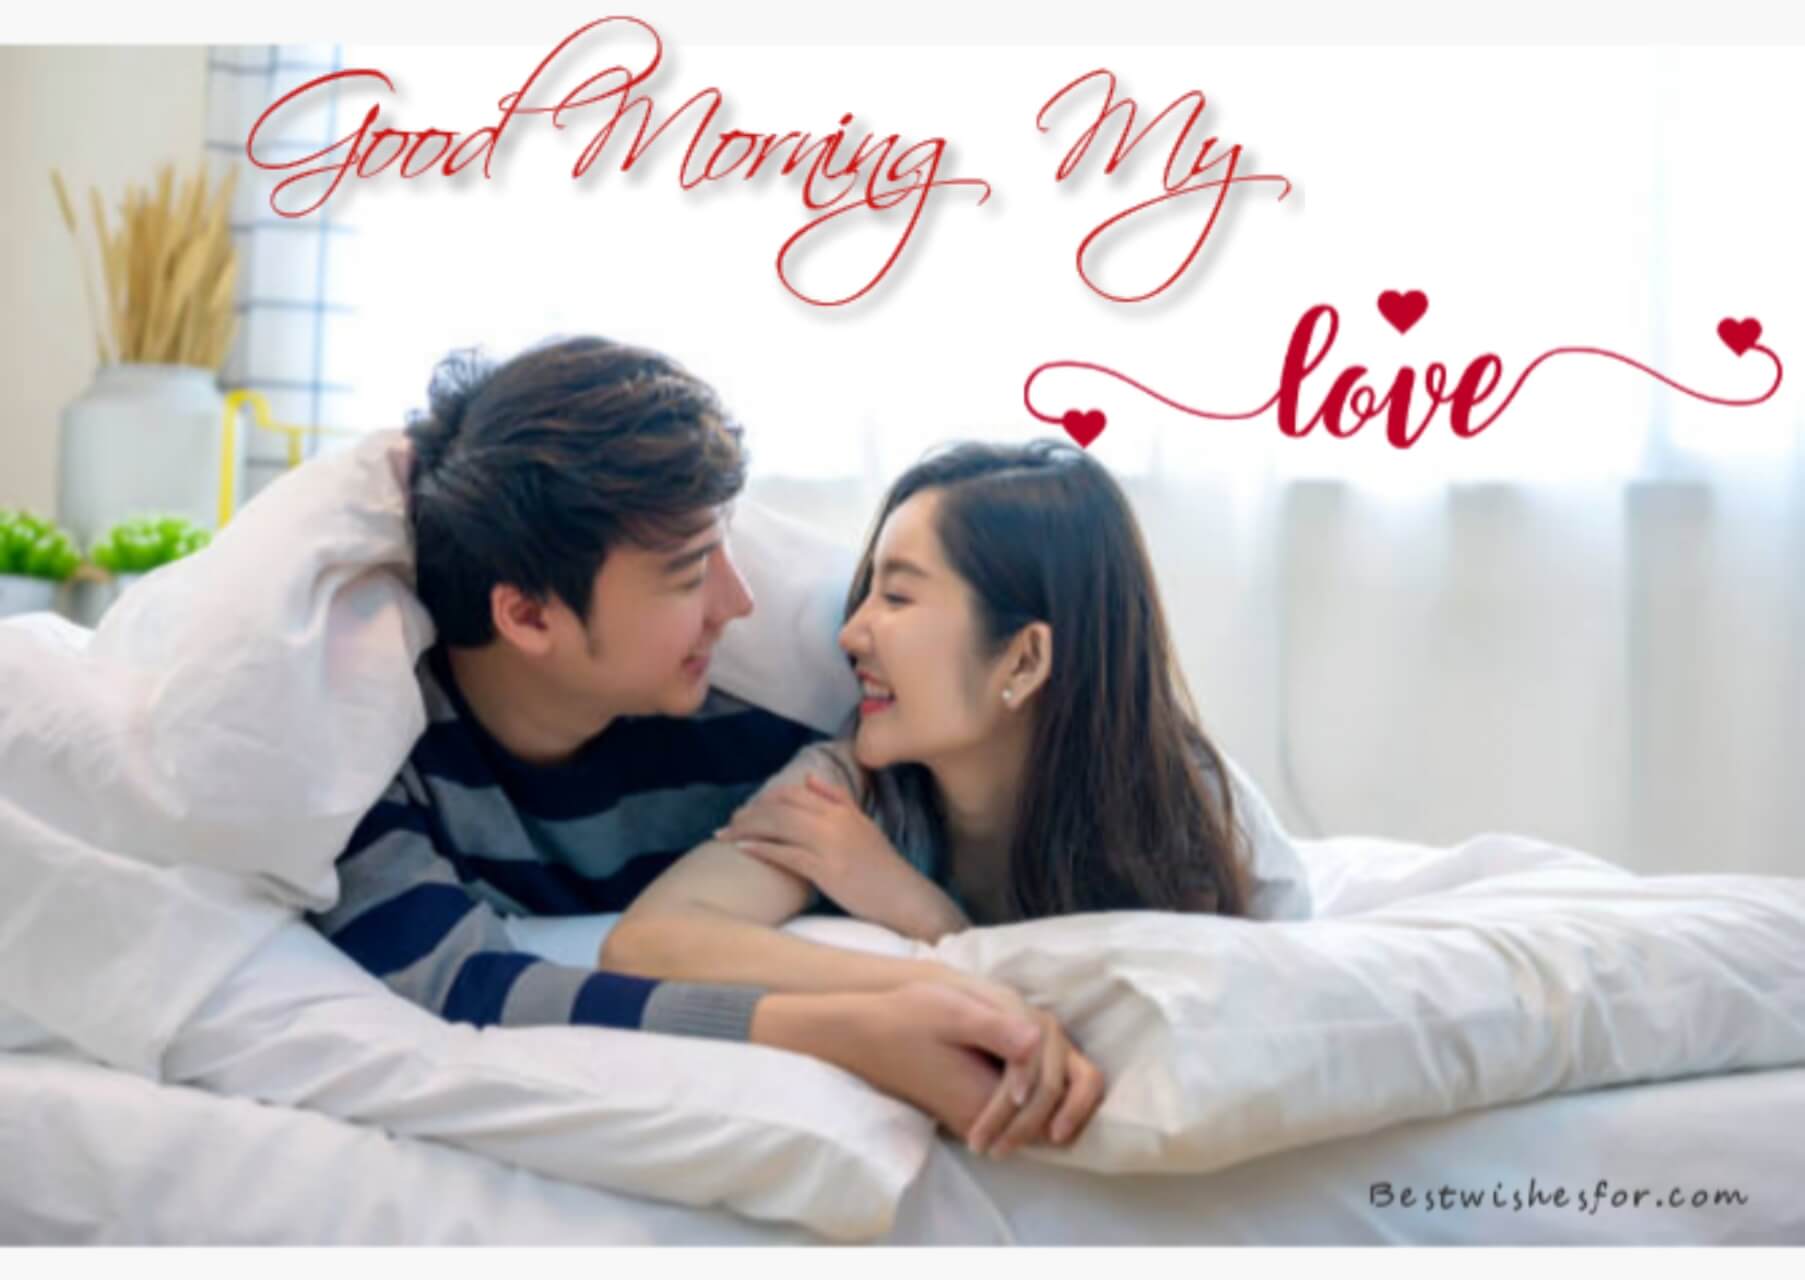 Good Morning Sweet Love Messages For Her | Best Wishes